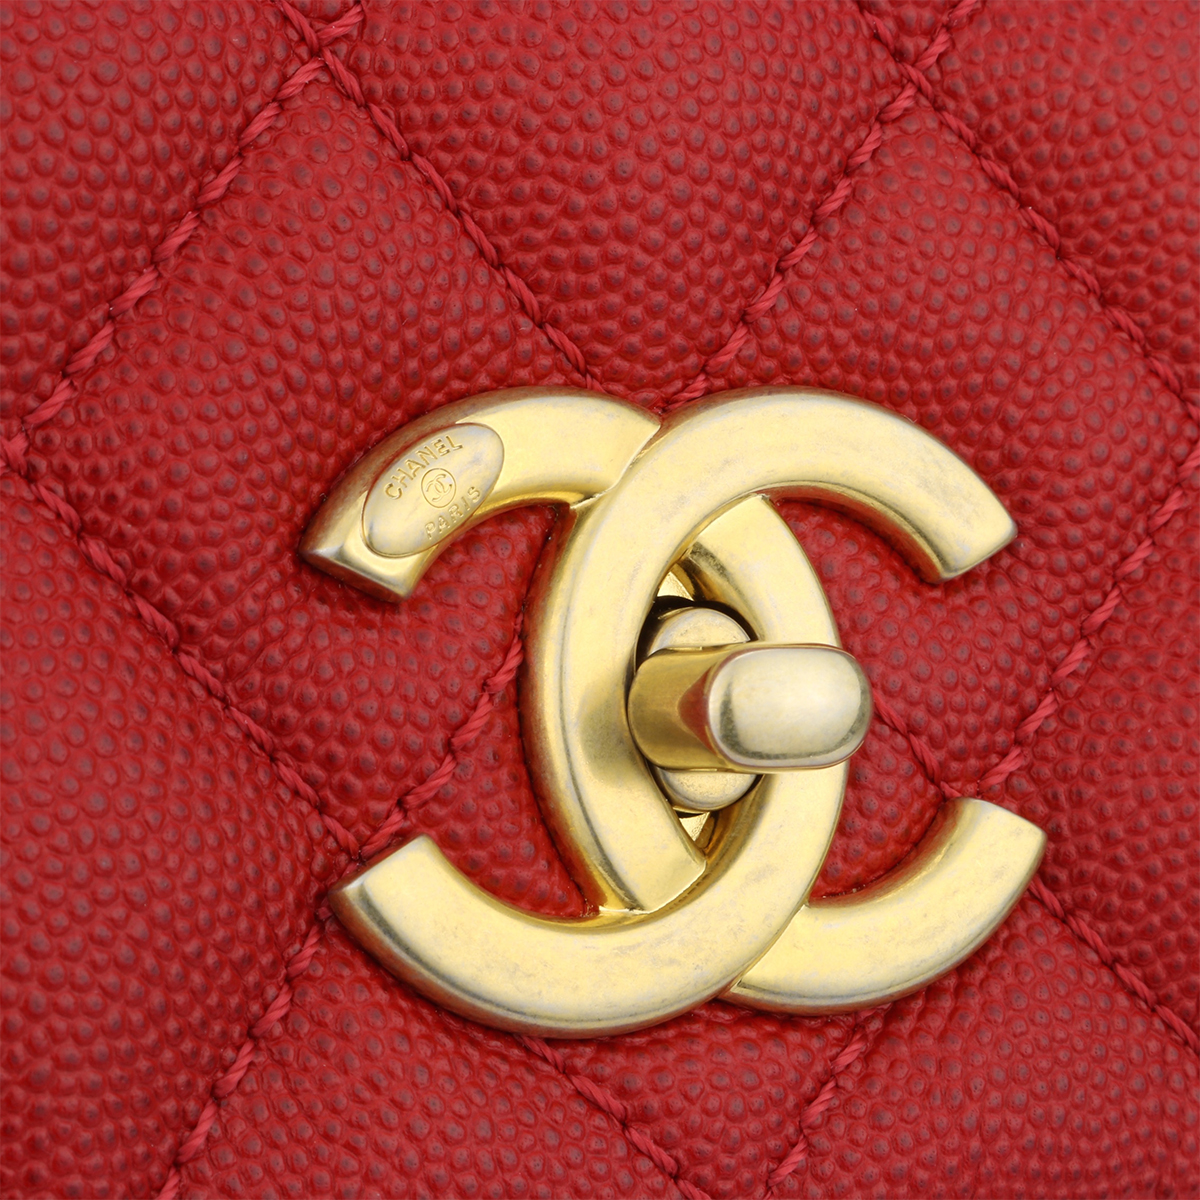 CHANEL TRENDY CC TOP HANDLE FLAP BAG Red For Sale at 1stDibs